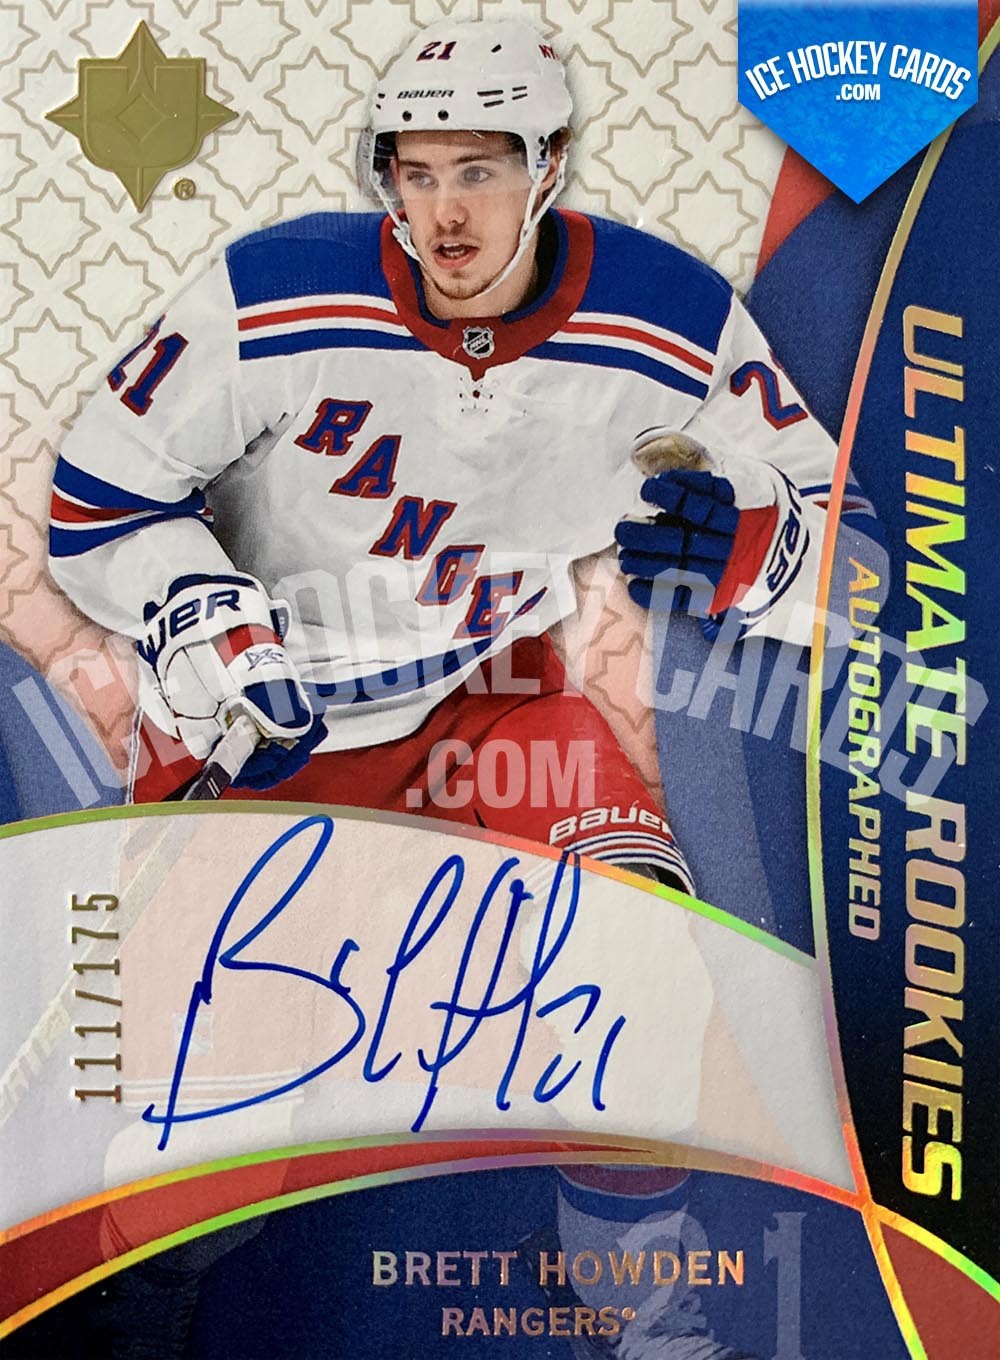 Upper Deck - Ultimate Collection 2018-19 - Brett Howden Autographed Ultimate Rookies Card